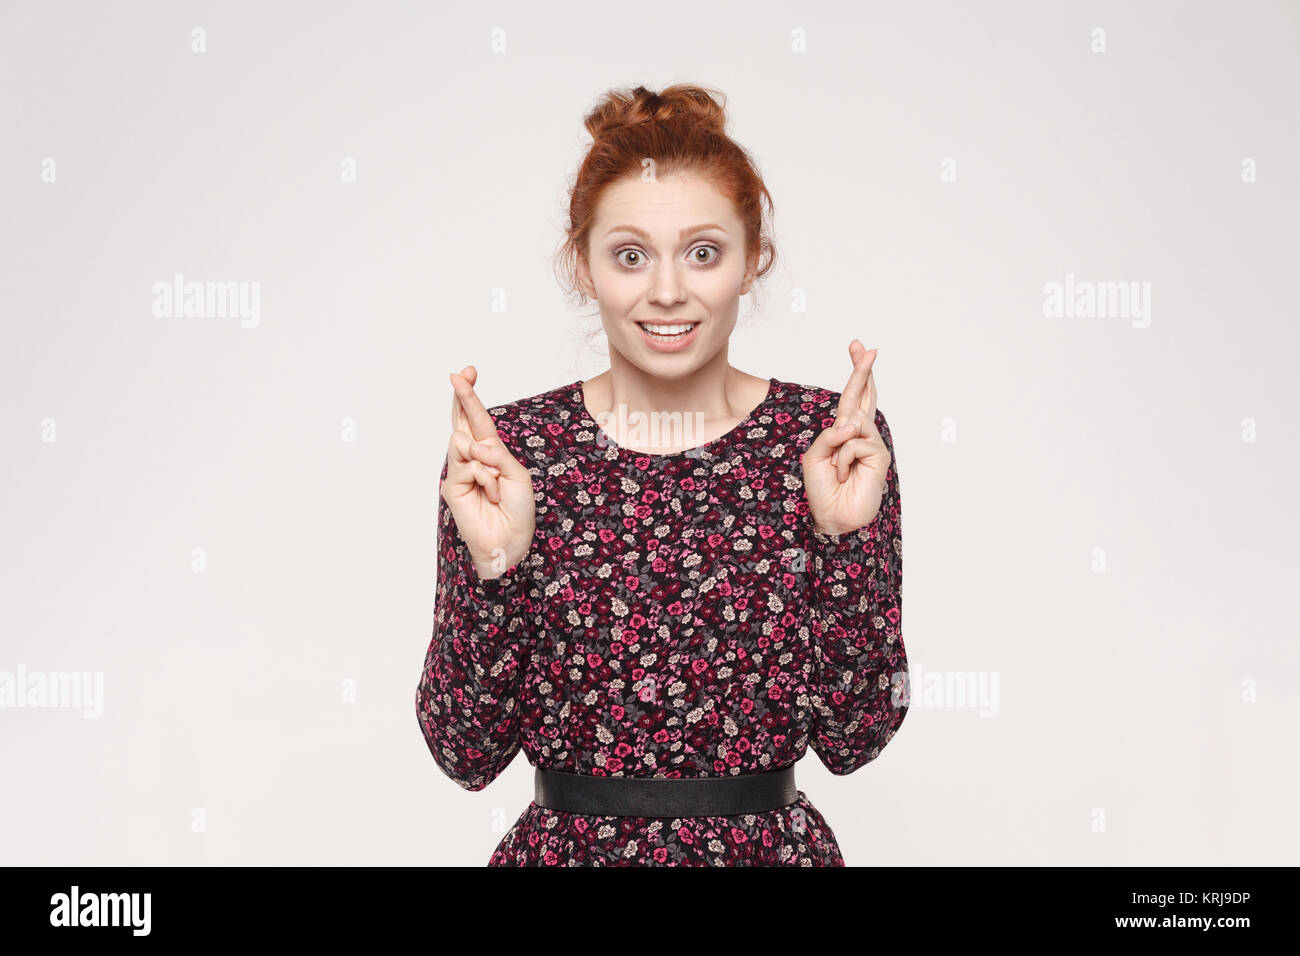 Human emotions and feelings. Superstitious teenager ginger woman crossing fingers for good luck, hoping her wishes will come true, having excited happ Stock Photo